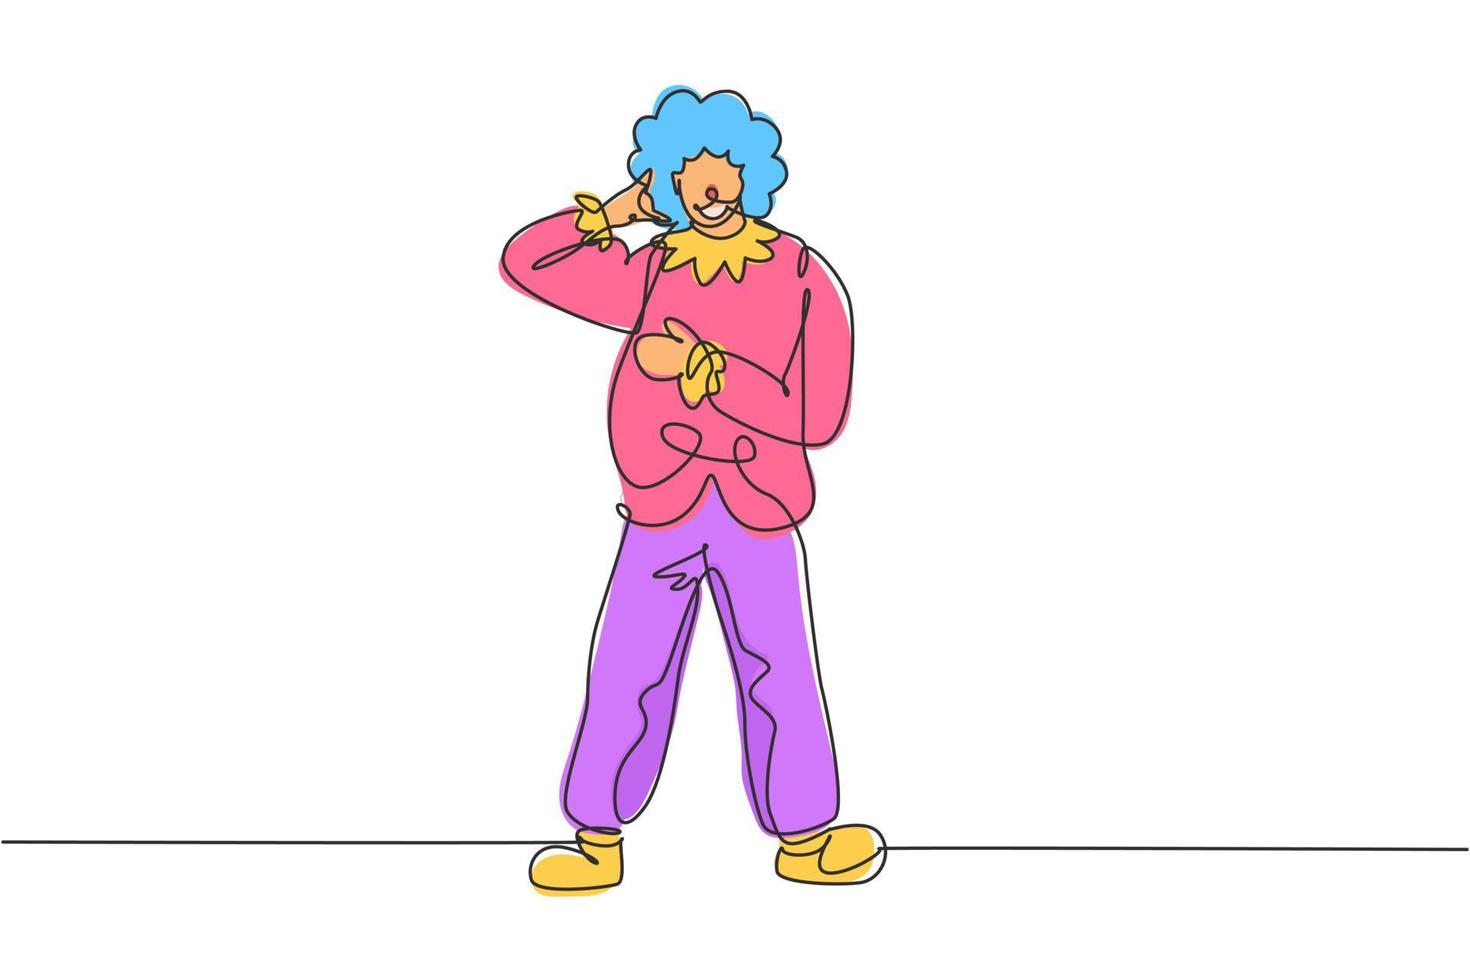 Single one line drawing clown stands with call me gesture wearing wig and clown costume ready to entertain audience in the circus arena. Modern continuous line draw design graphic vector illustration